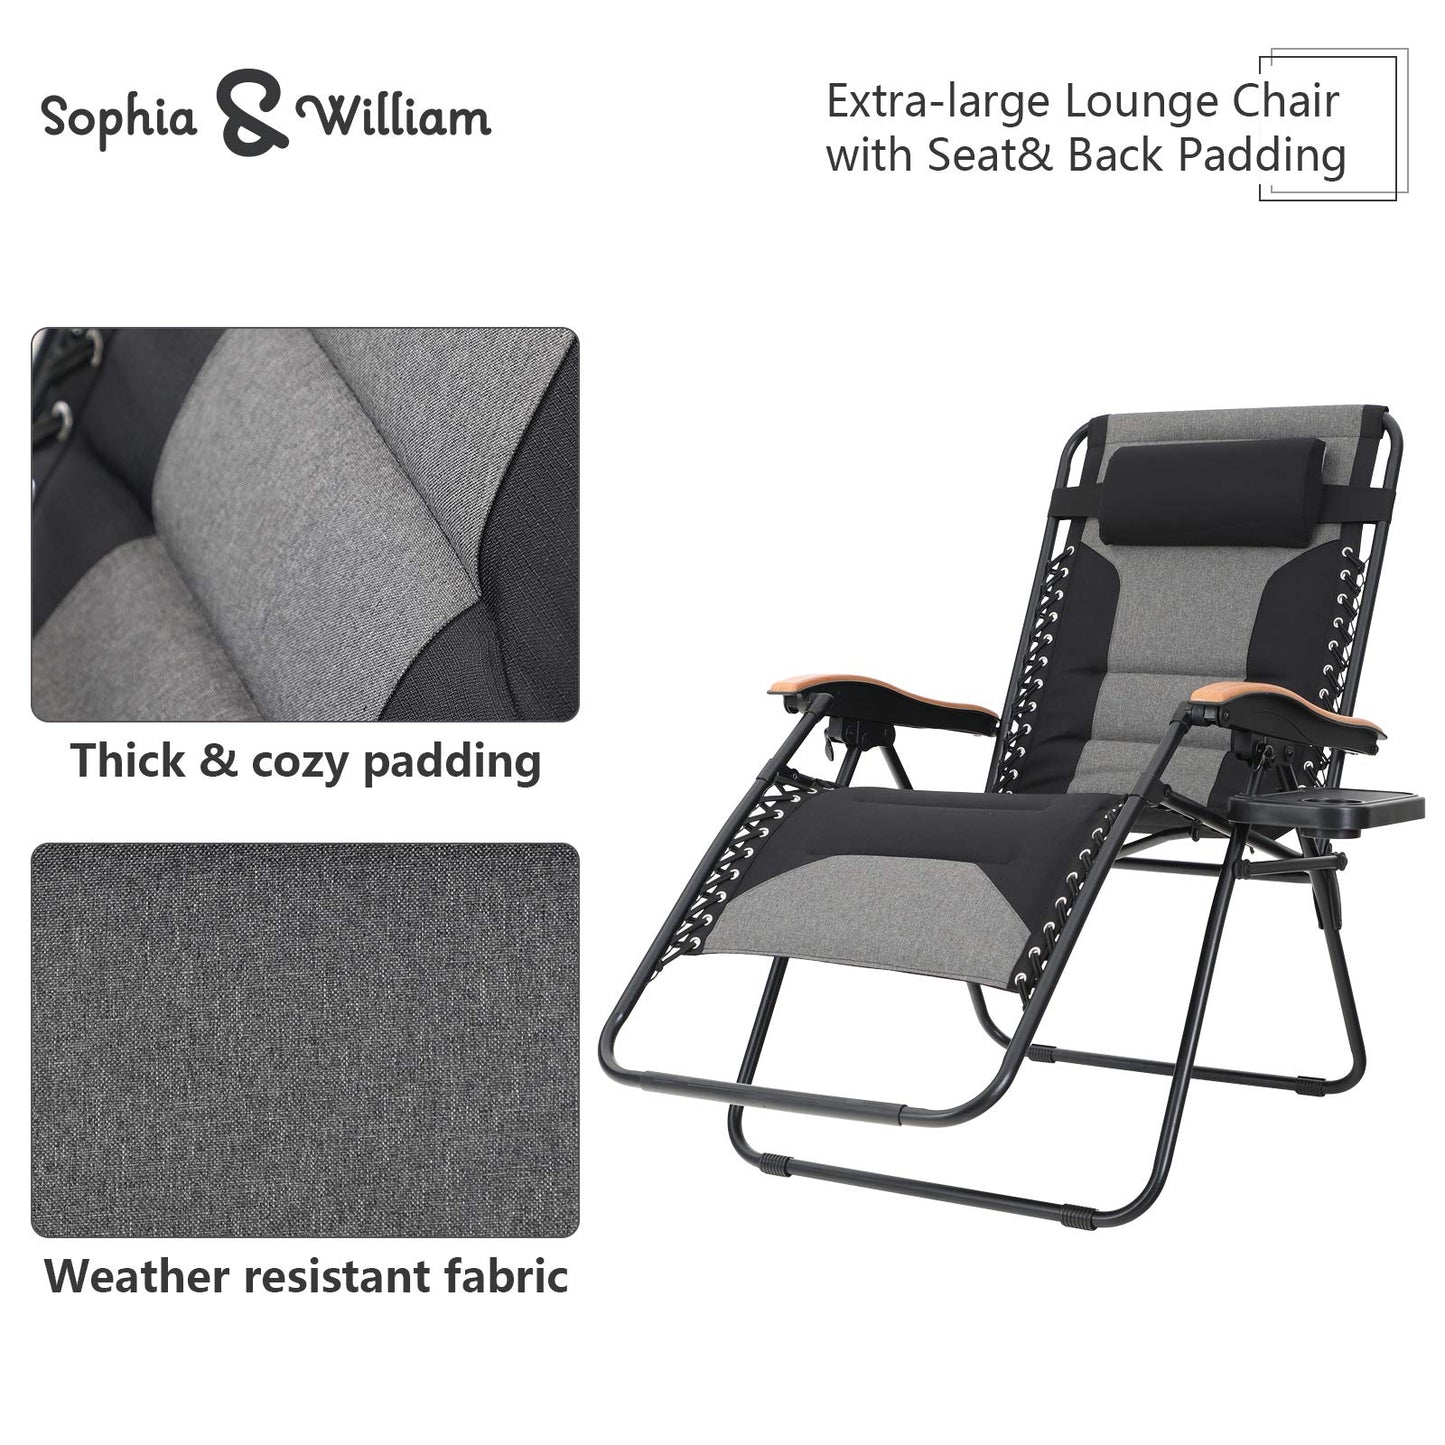 Sophia & William Padded Zero Gravity Chair Oversize Lounge Chair with Free Cup Holder, Supports 350 LBS (Black) 1 Pack Black